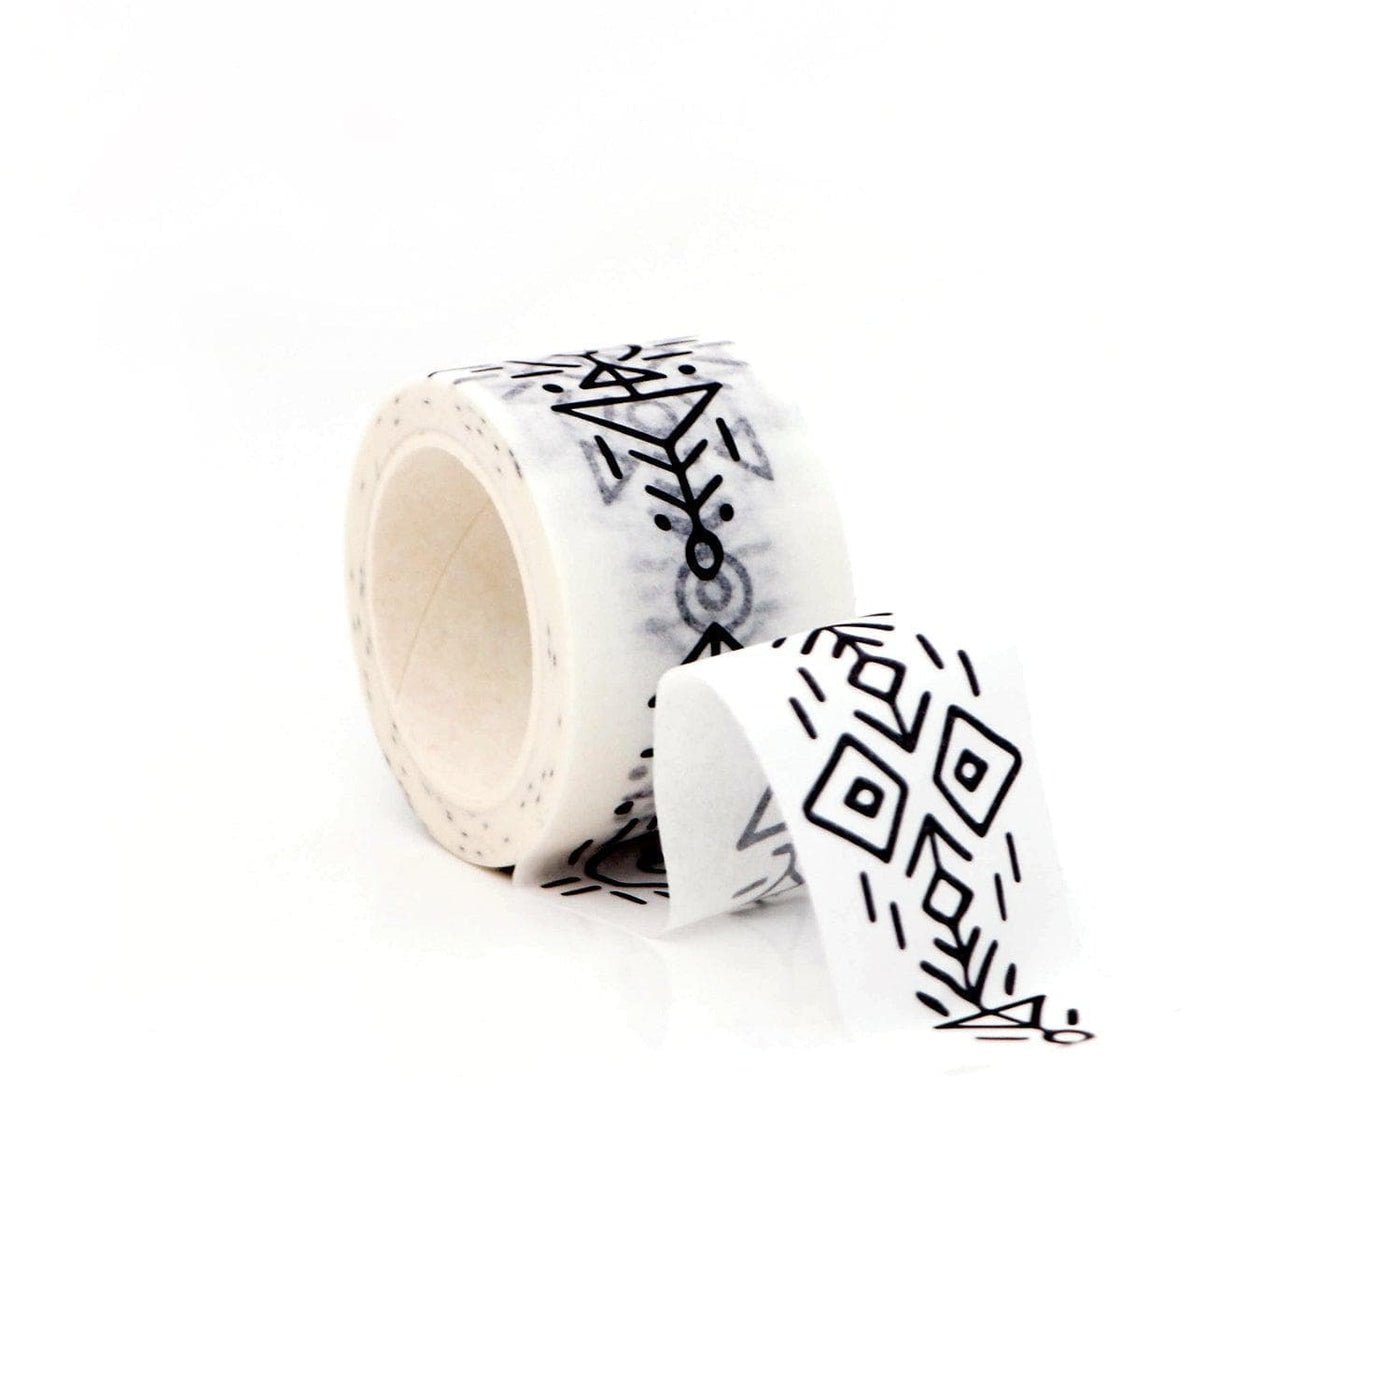 20 Rolls/Set Combination Washi Tape For Scrapbooking, Journaling With  Borders, Basic Patterns And Paper Sticker Tape Rolls For Beginners